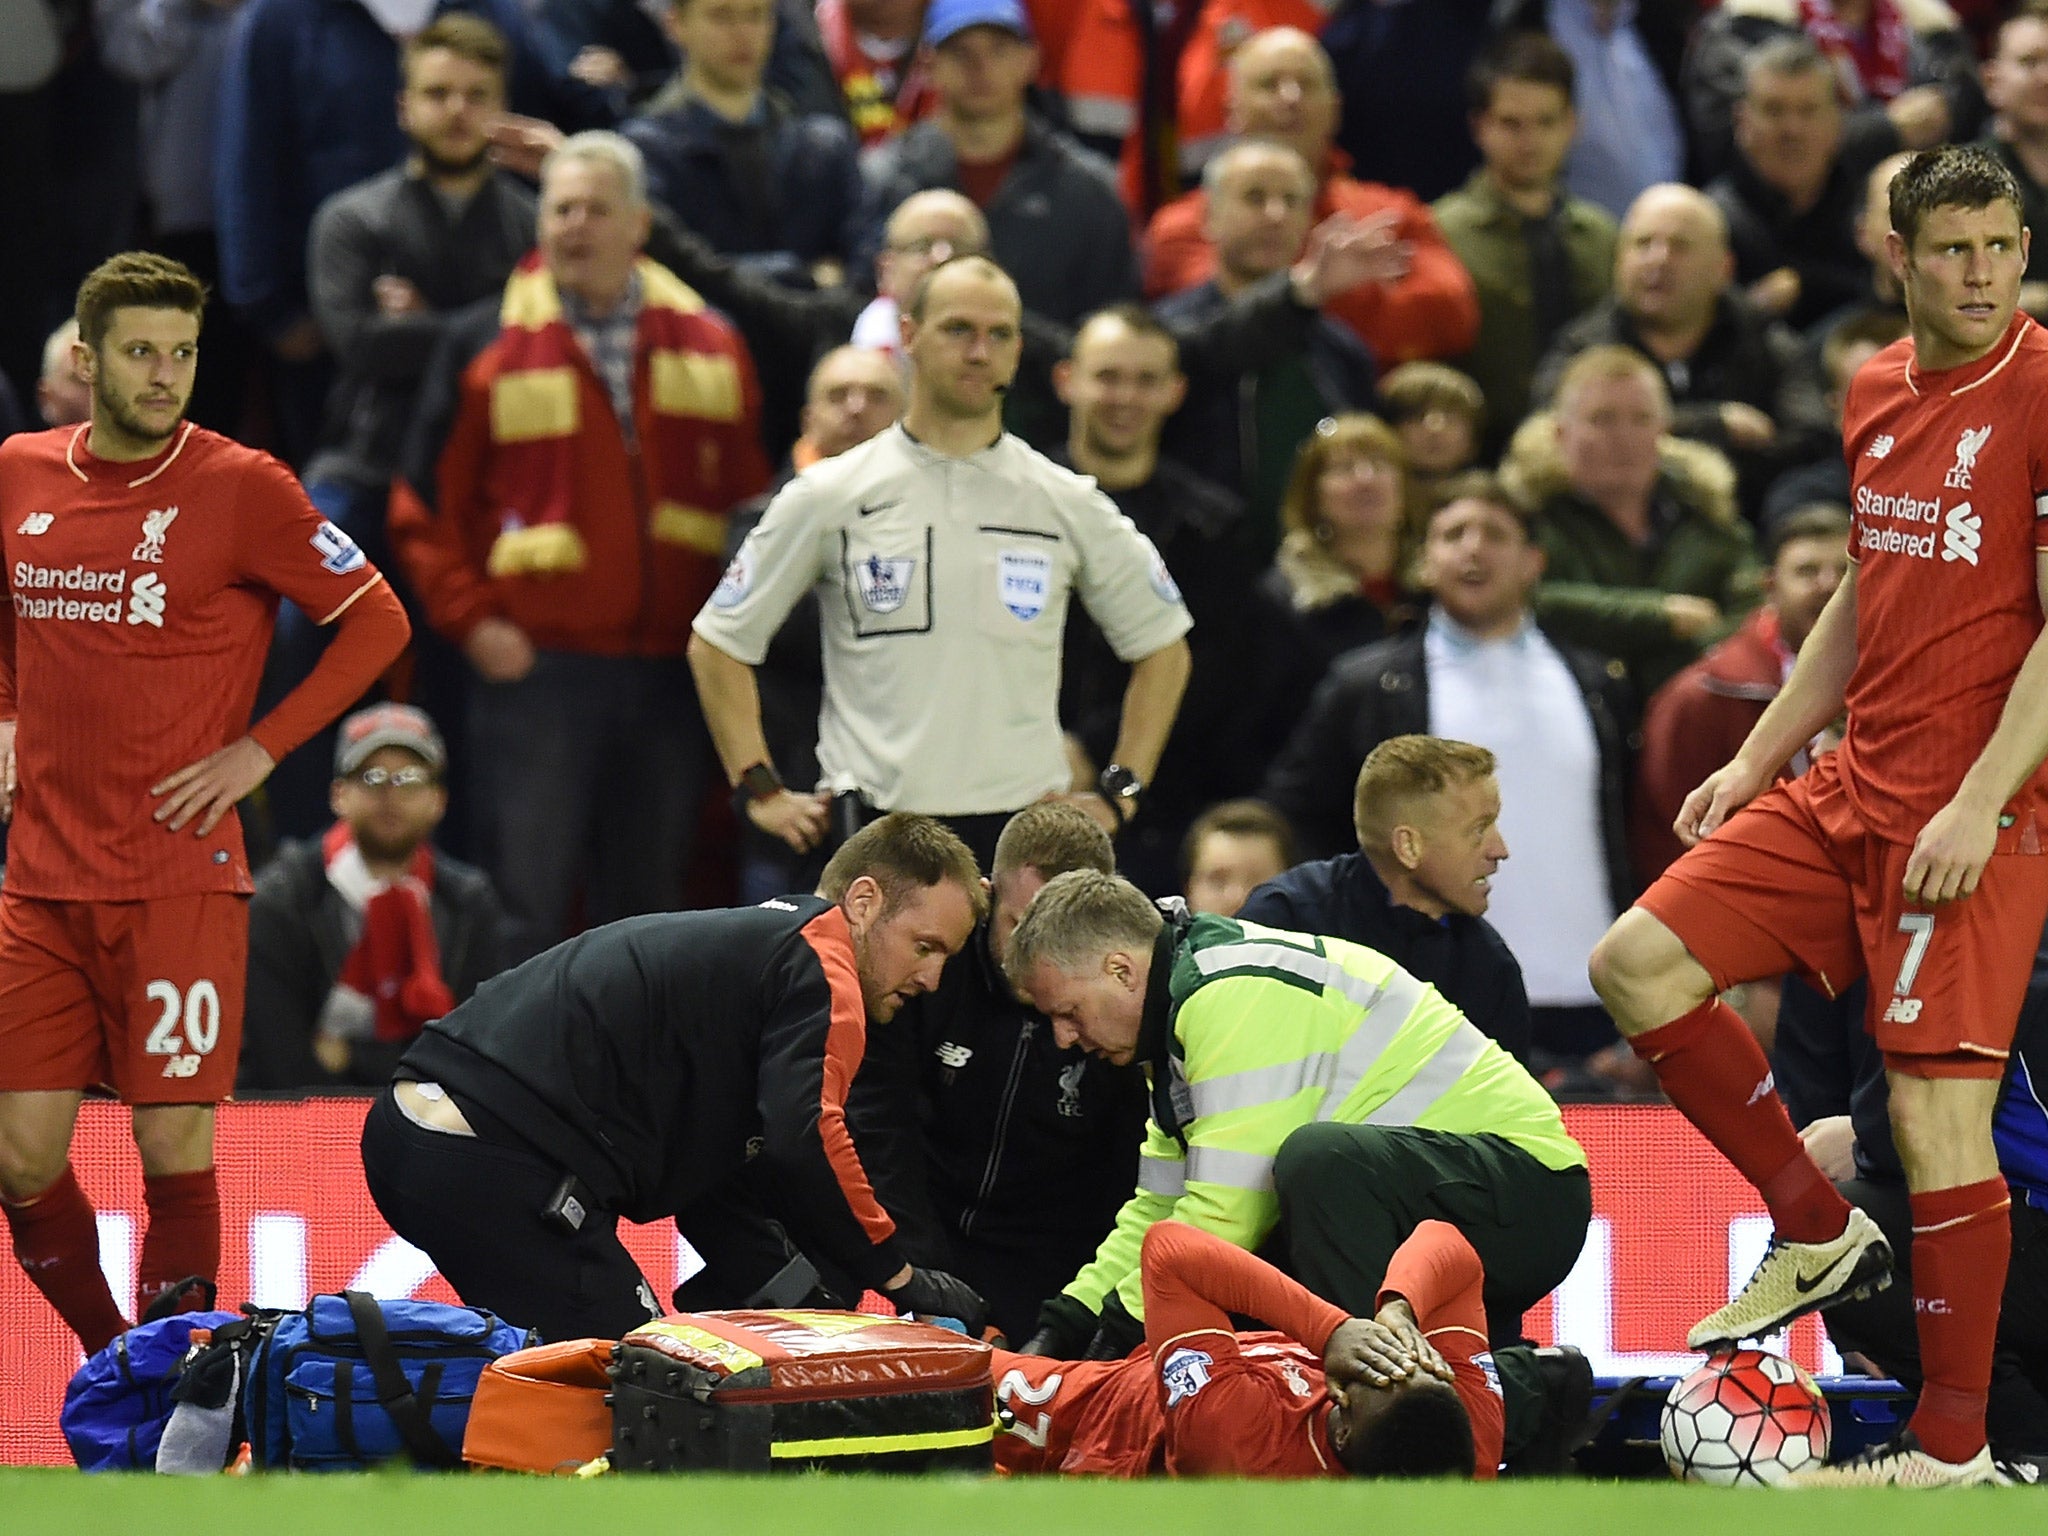 Liverpool striker Divock Origi suffered an ankle injury in the 4-0 win over Everton